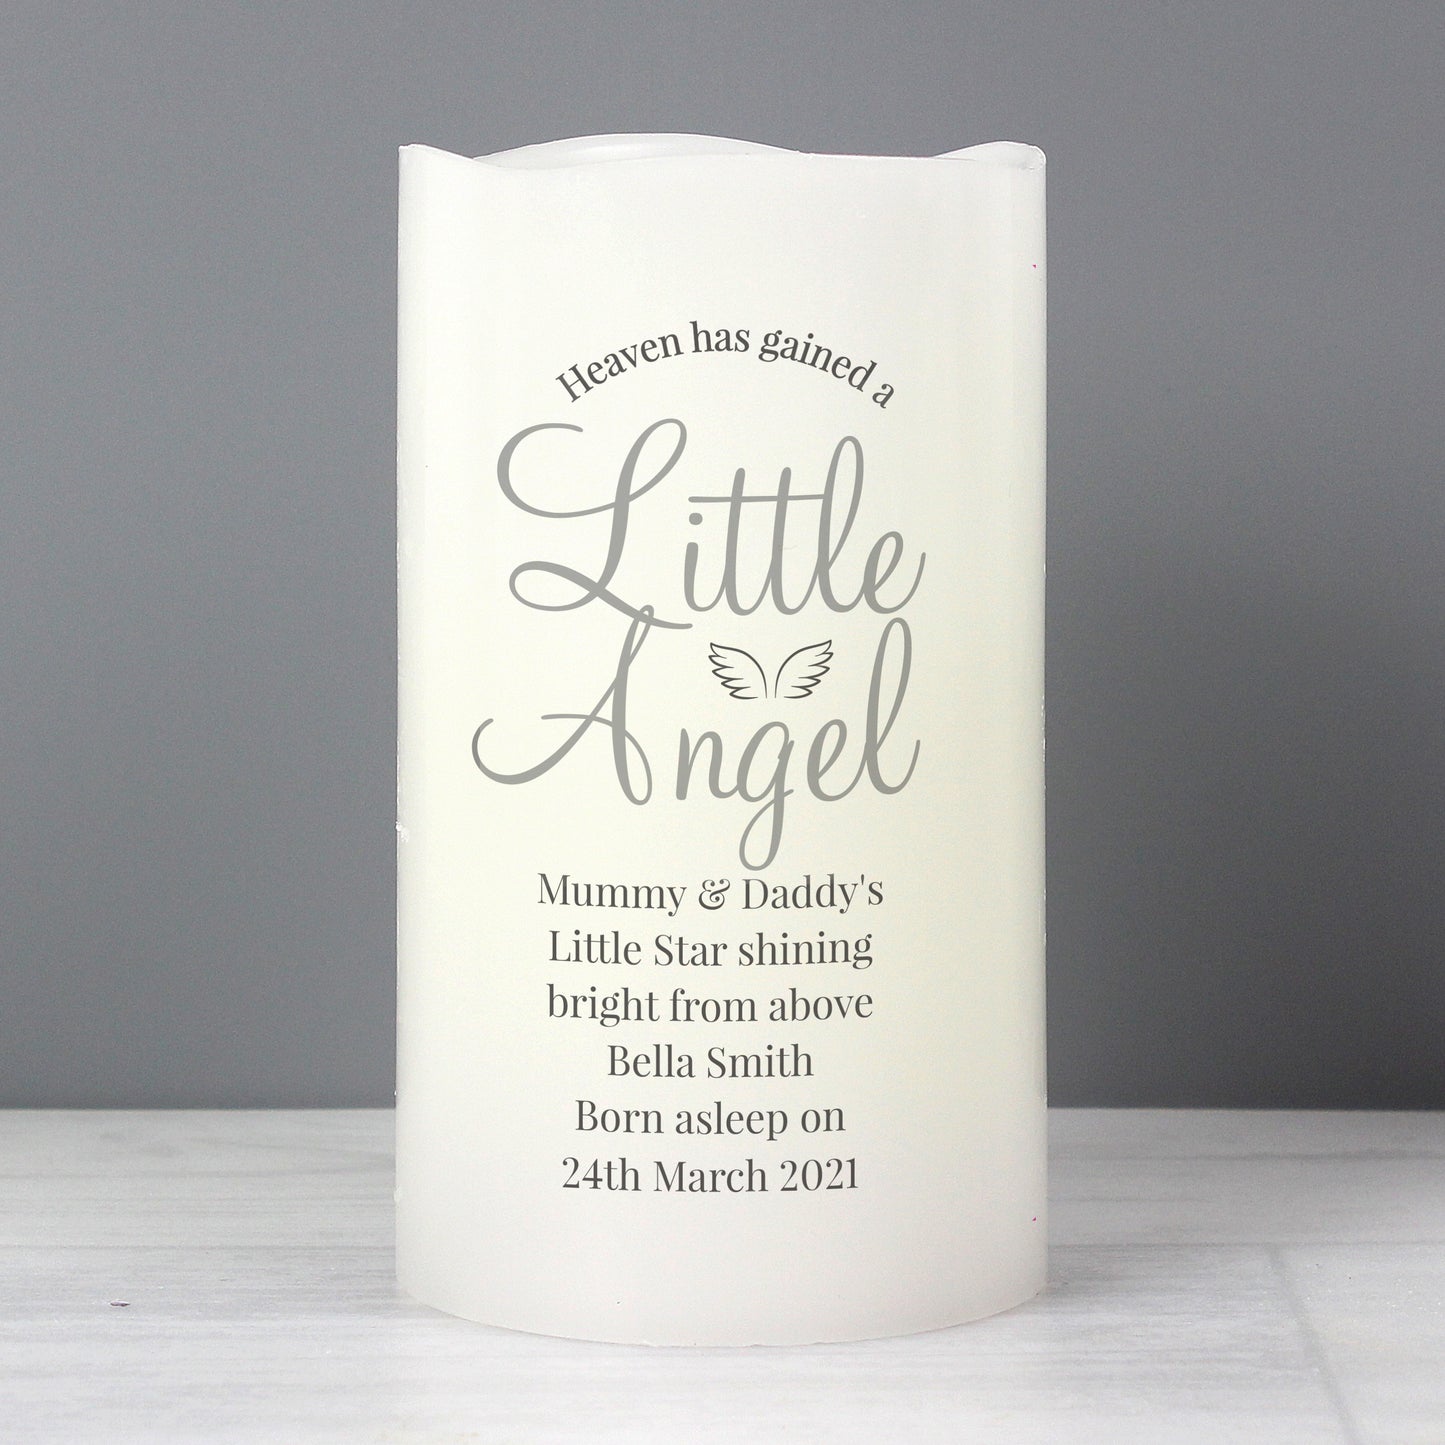 Personalised 'Little Angel' Memorial LED Candle